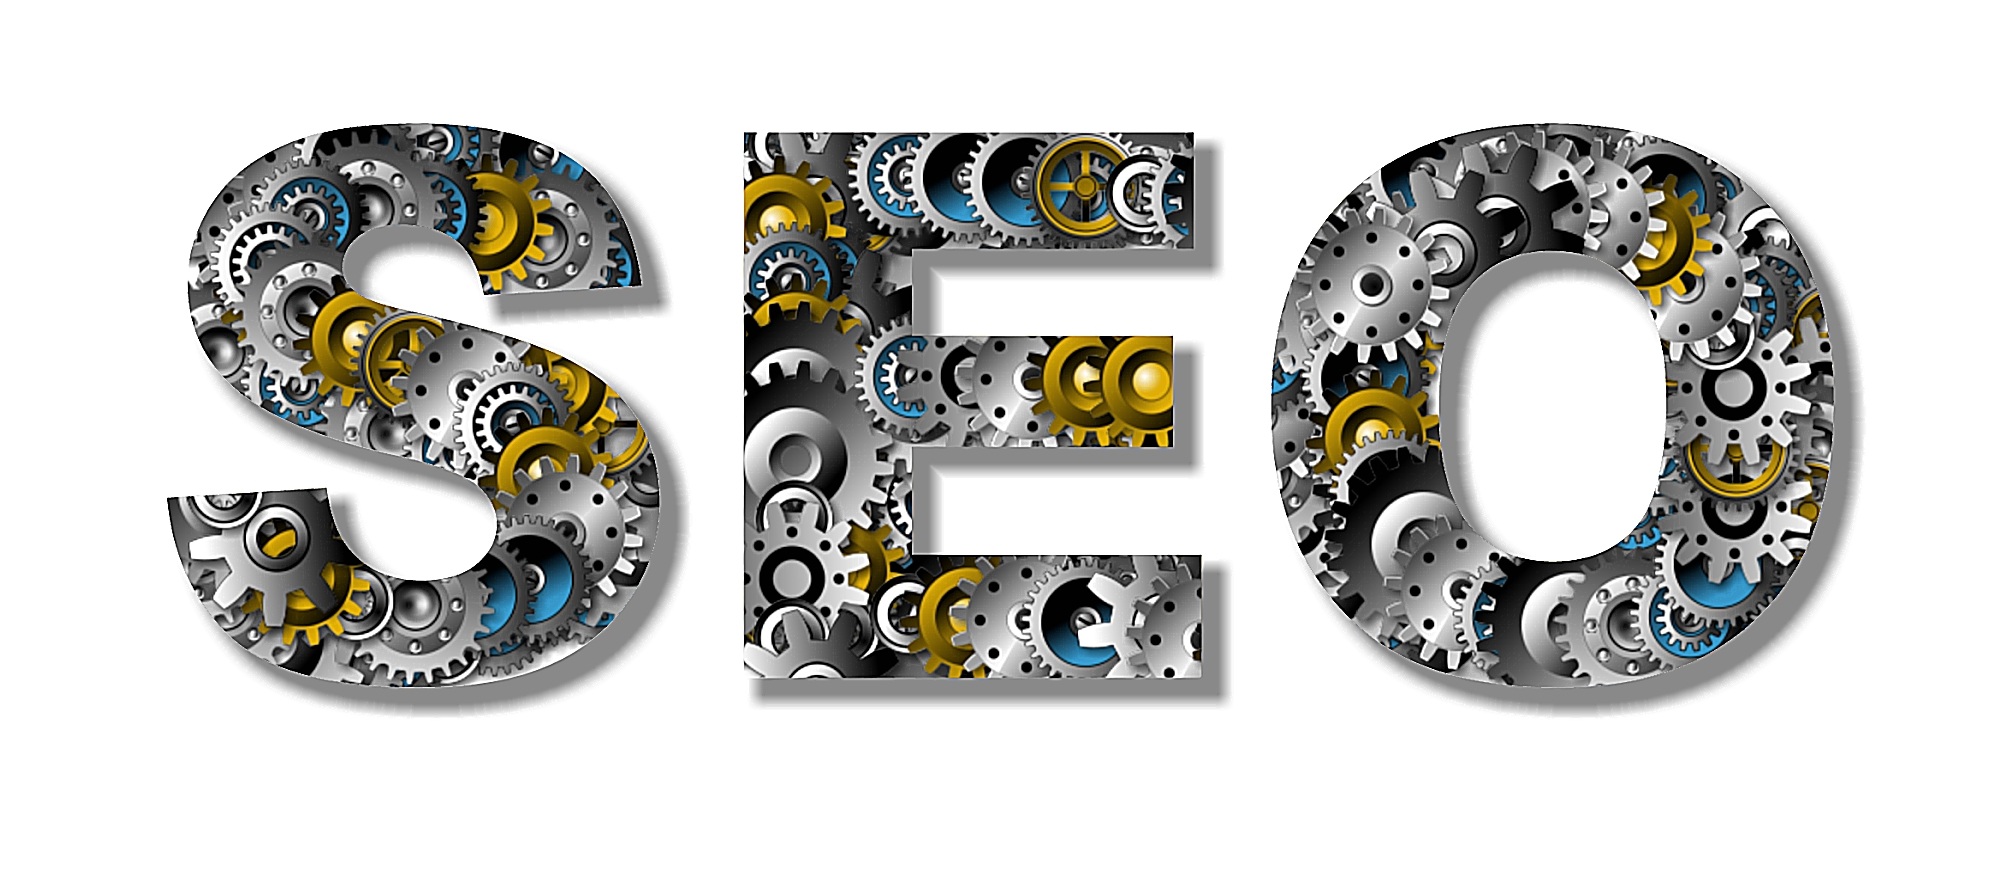 seo and ppc strategy